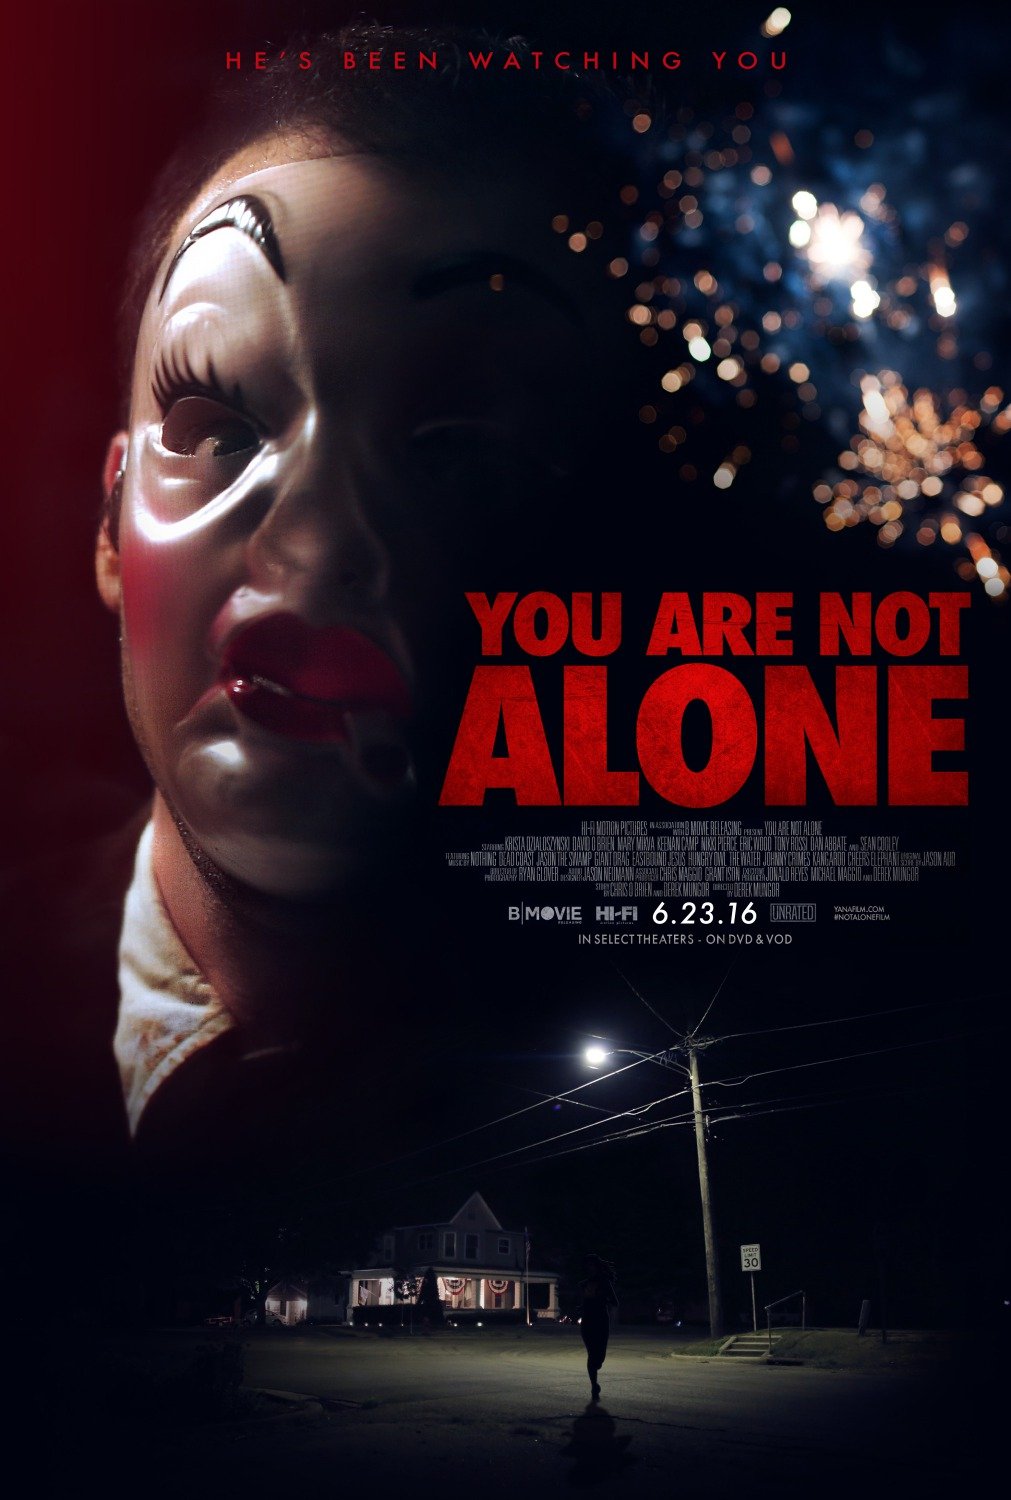 The Movie Who Are Not Lonely Possess